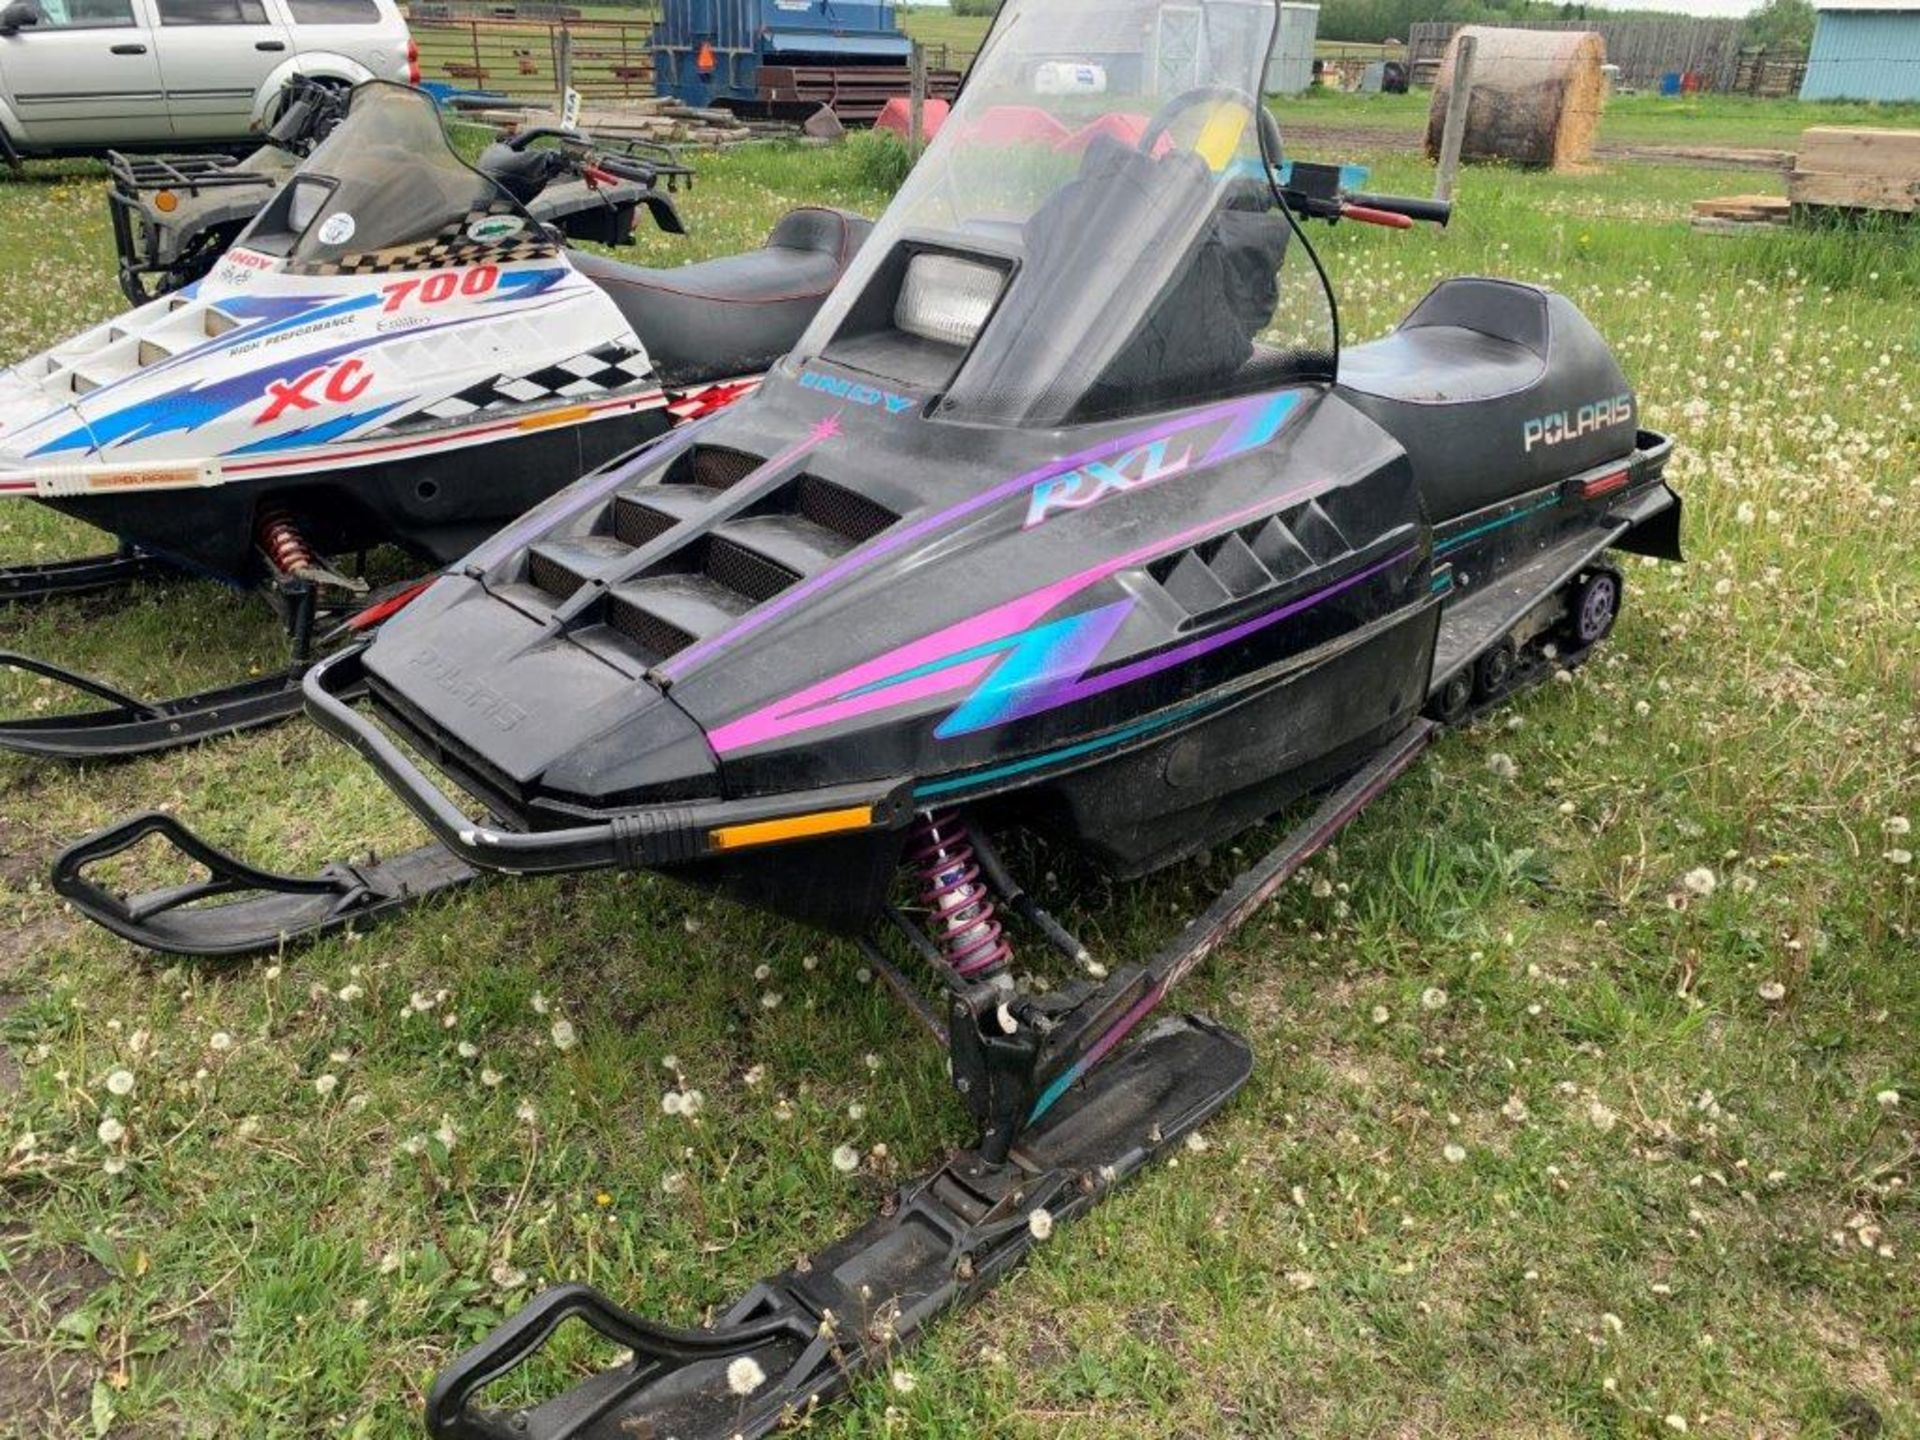 POLARIS RXL INDY 650 SNOWMOBILE, 2,937.6 MILES SHOWING, COVER, DOLLIES, S/N 2609413